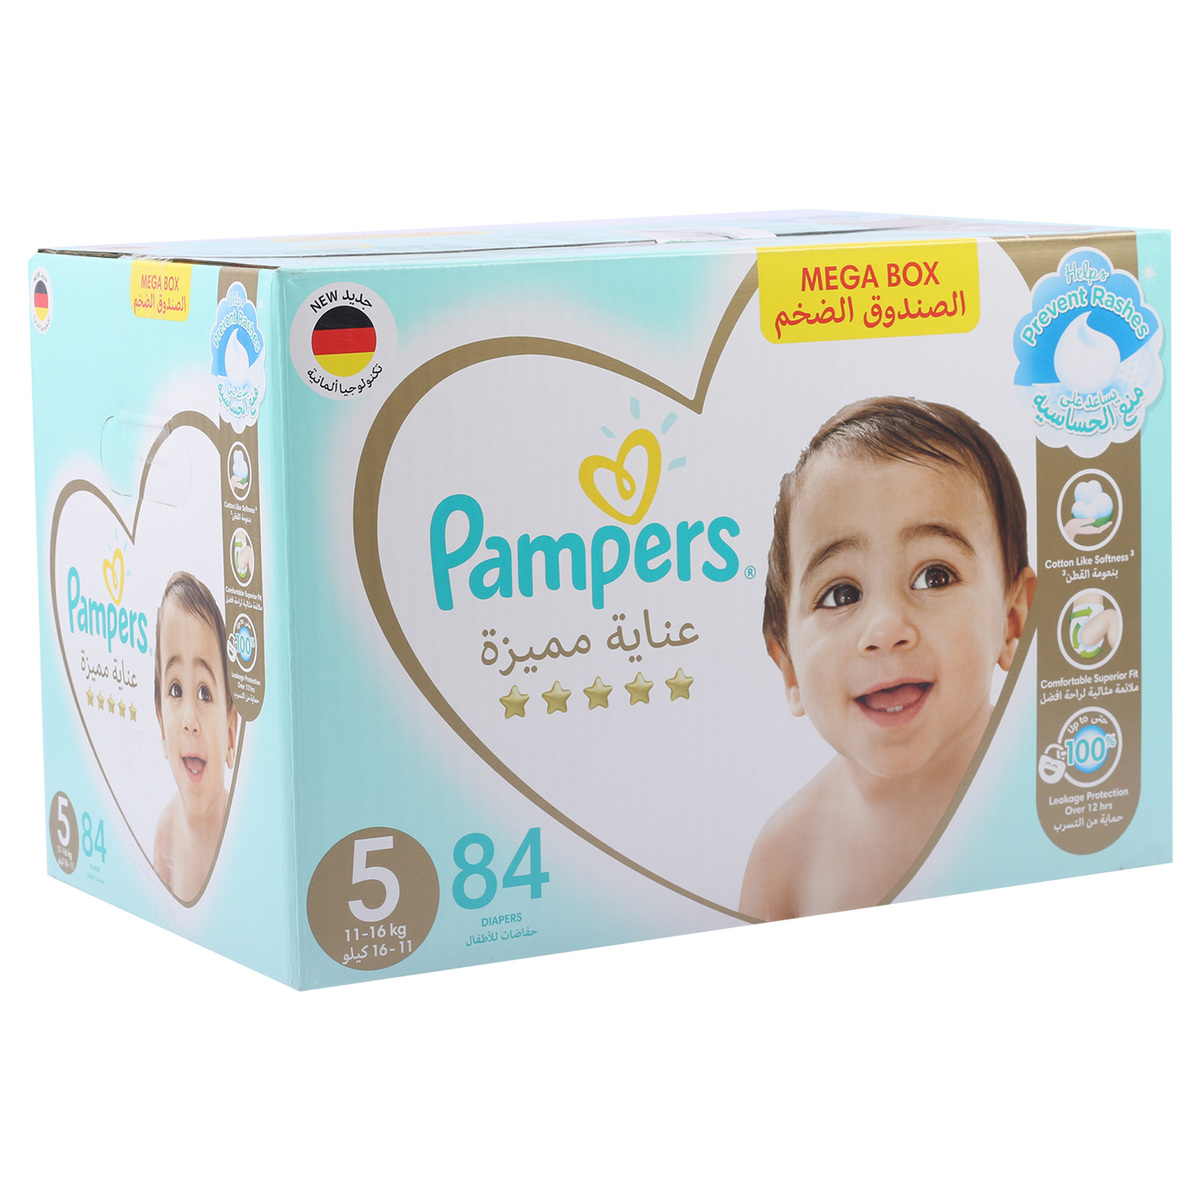 Pampers Premium Diaper Extra Absorb Size 5 11-16 kg Value Pack 84 pcs